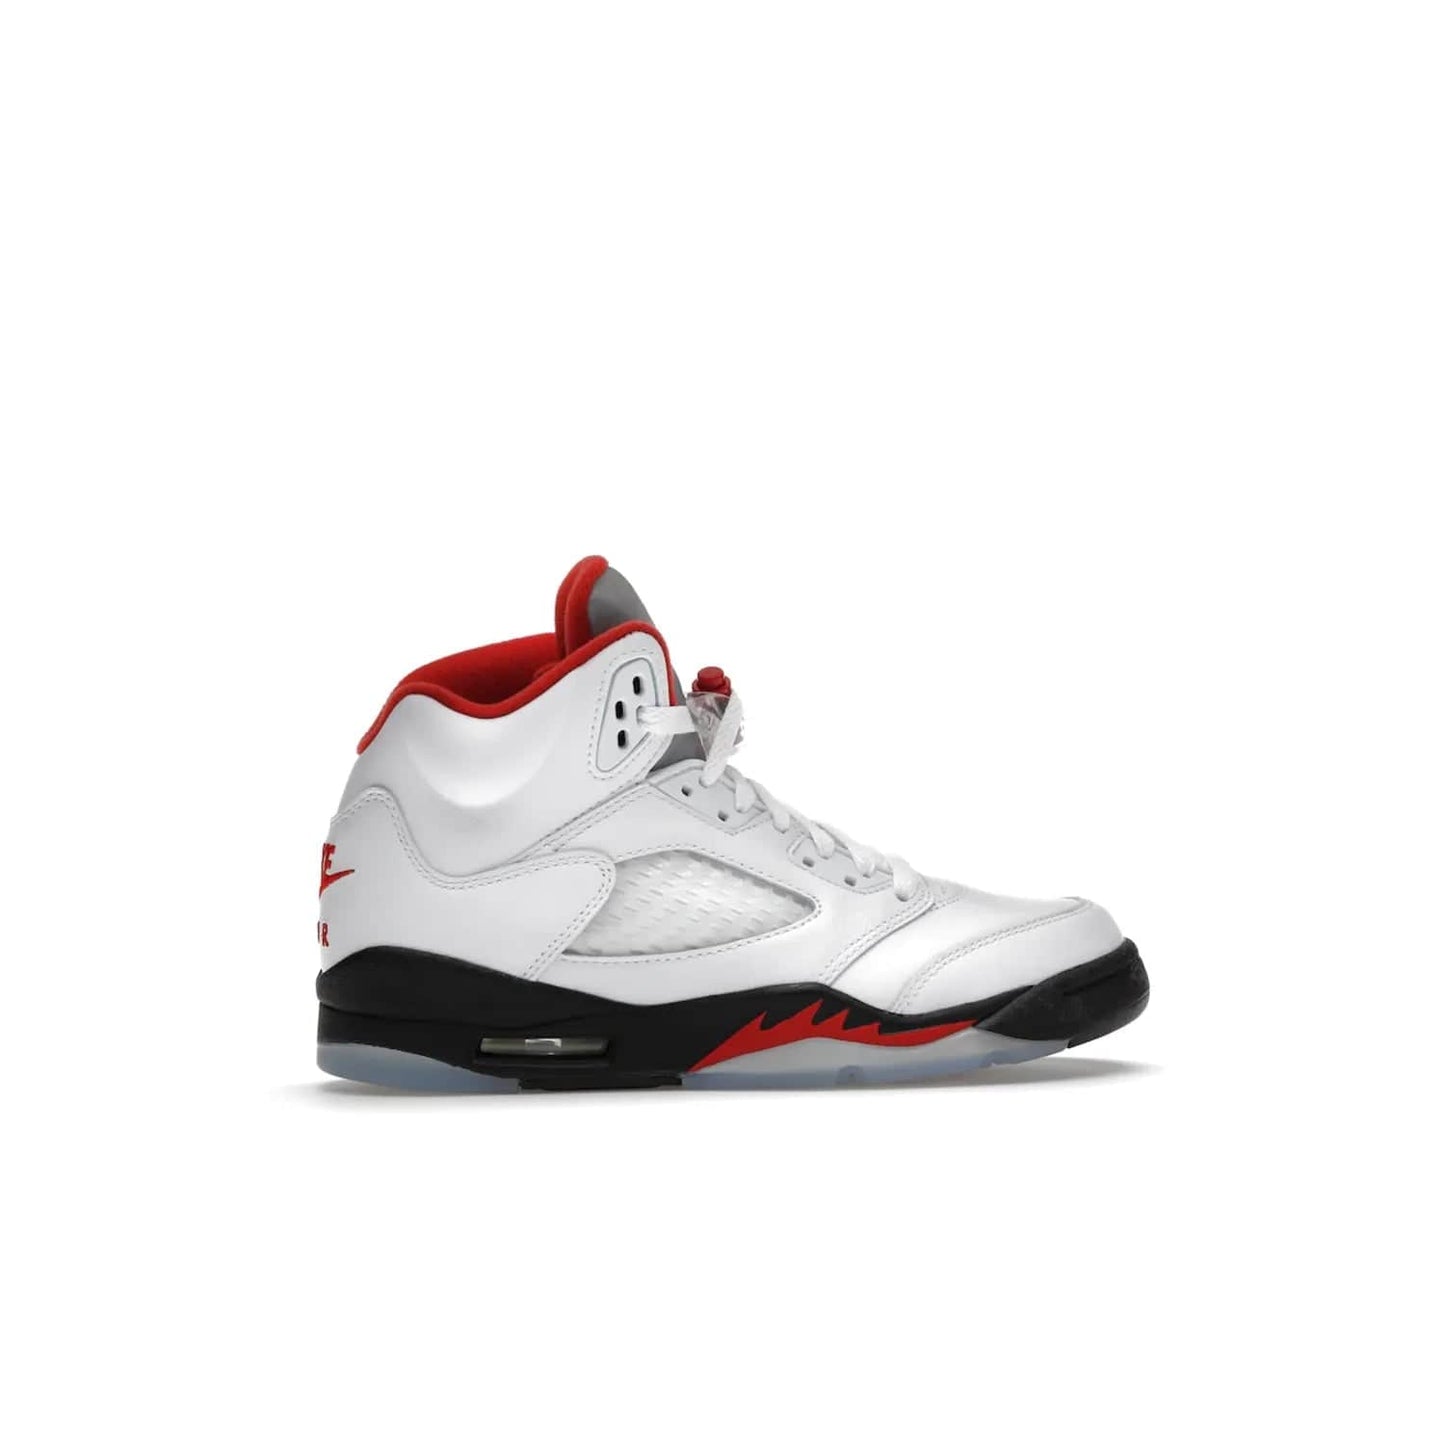 Jordan 5 Retro Fire Red Silver Tongue (2020) (GS) - Image 36 - Only at www.BallersClubKickz.com - A stylish option for any grade schooler. The Air Jordan 5 Retro Fire Red Silver Tongue 2020 GS features a combination of four hues, premium white leather, a clear mesh mid-upper and a reflective silver tongue. An icy translucent blue outsole completes the look. Available on May 2, $150.